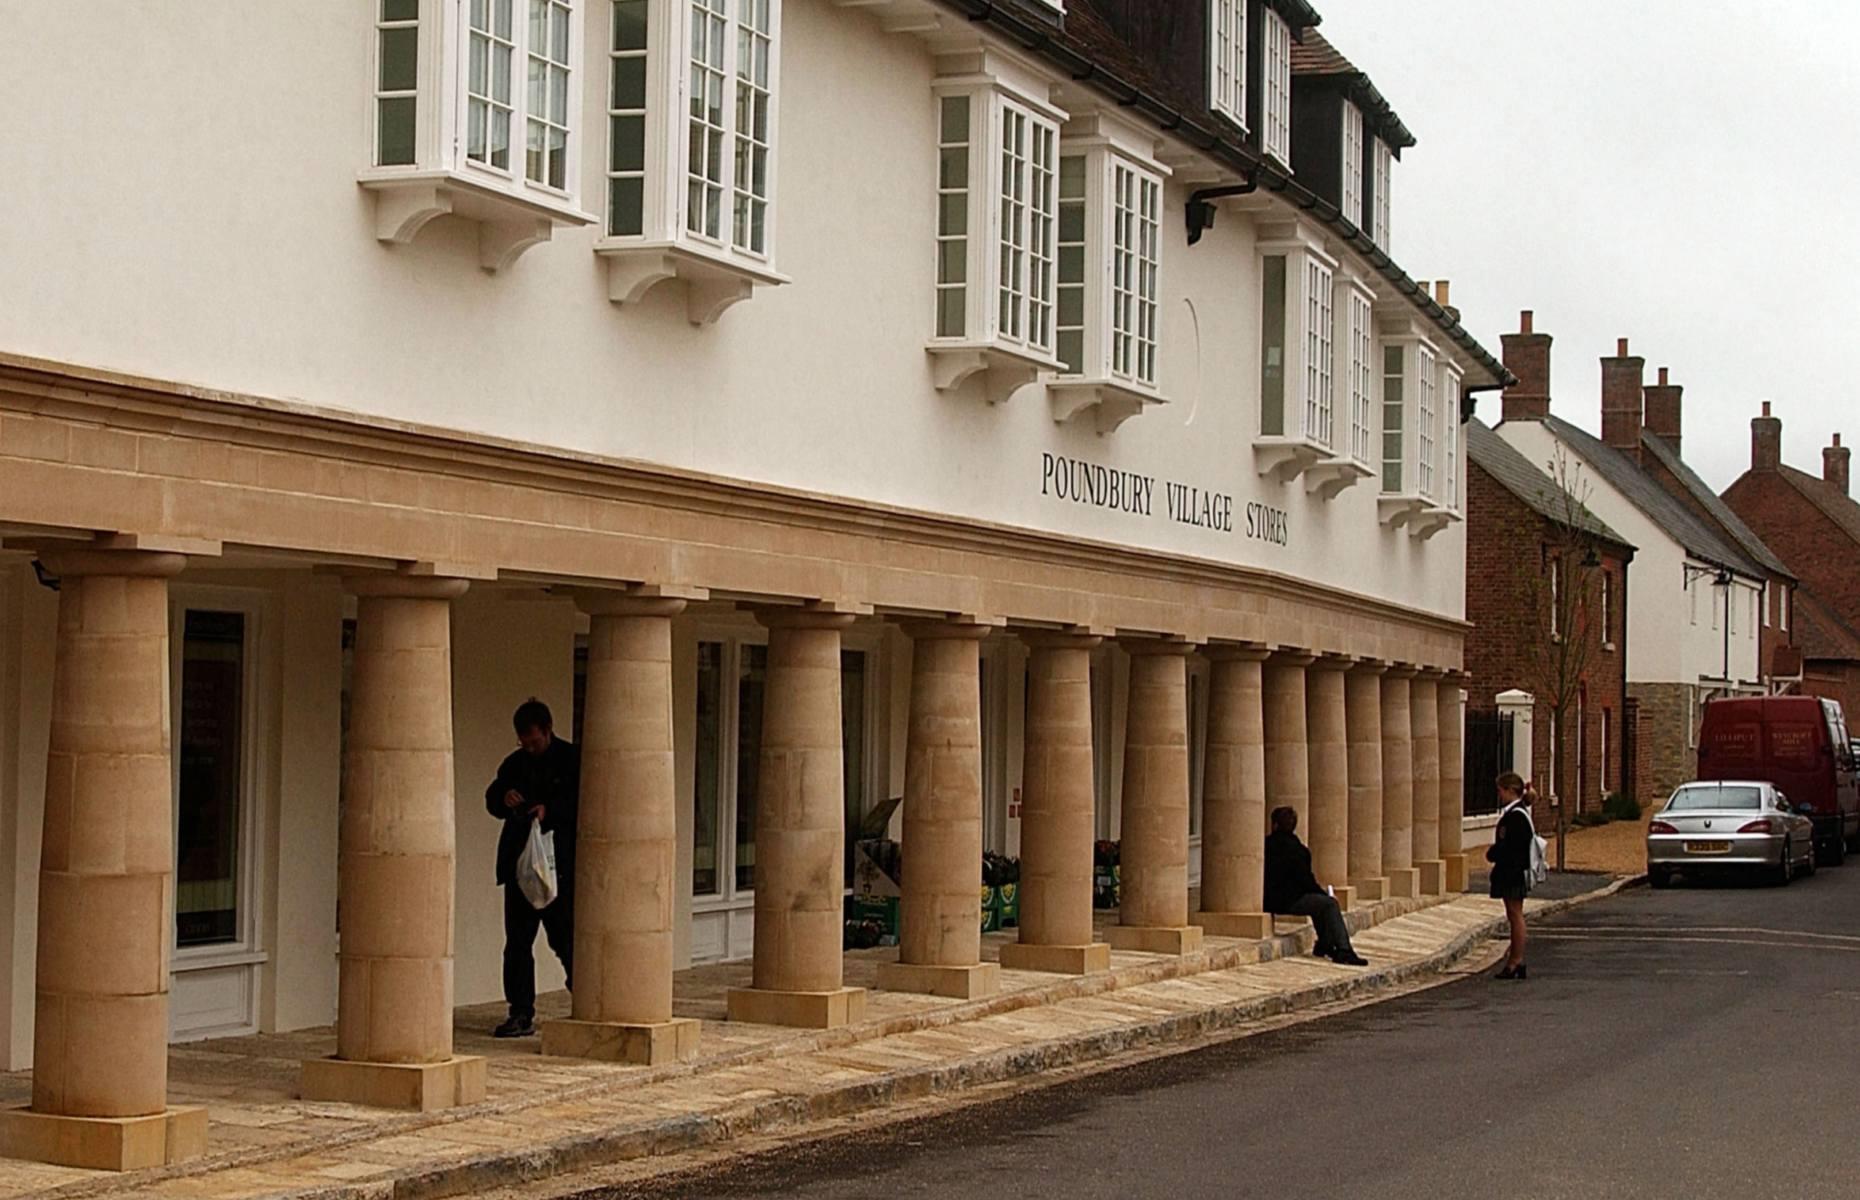 <p>The market hall on Pummery Square, which is the hub of Phase One of Poundbury’s construction, would not be out of place in a medieval village. Designed by <a href="https://www.architectmagazine.com/design/behind-the-facade-of-prince-charless-poundbury_o">architect John Simpson</a>, it was completed in 2001 and is used for public and theatrical events. Other buildings on the square include the Village stores, The Poet Laureate Pub (named in honour of Ted Hughes) and other small shops and cafés. </p>